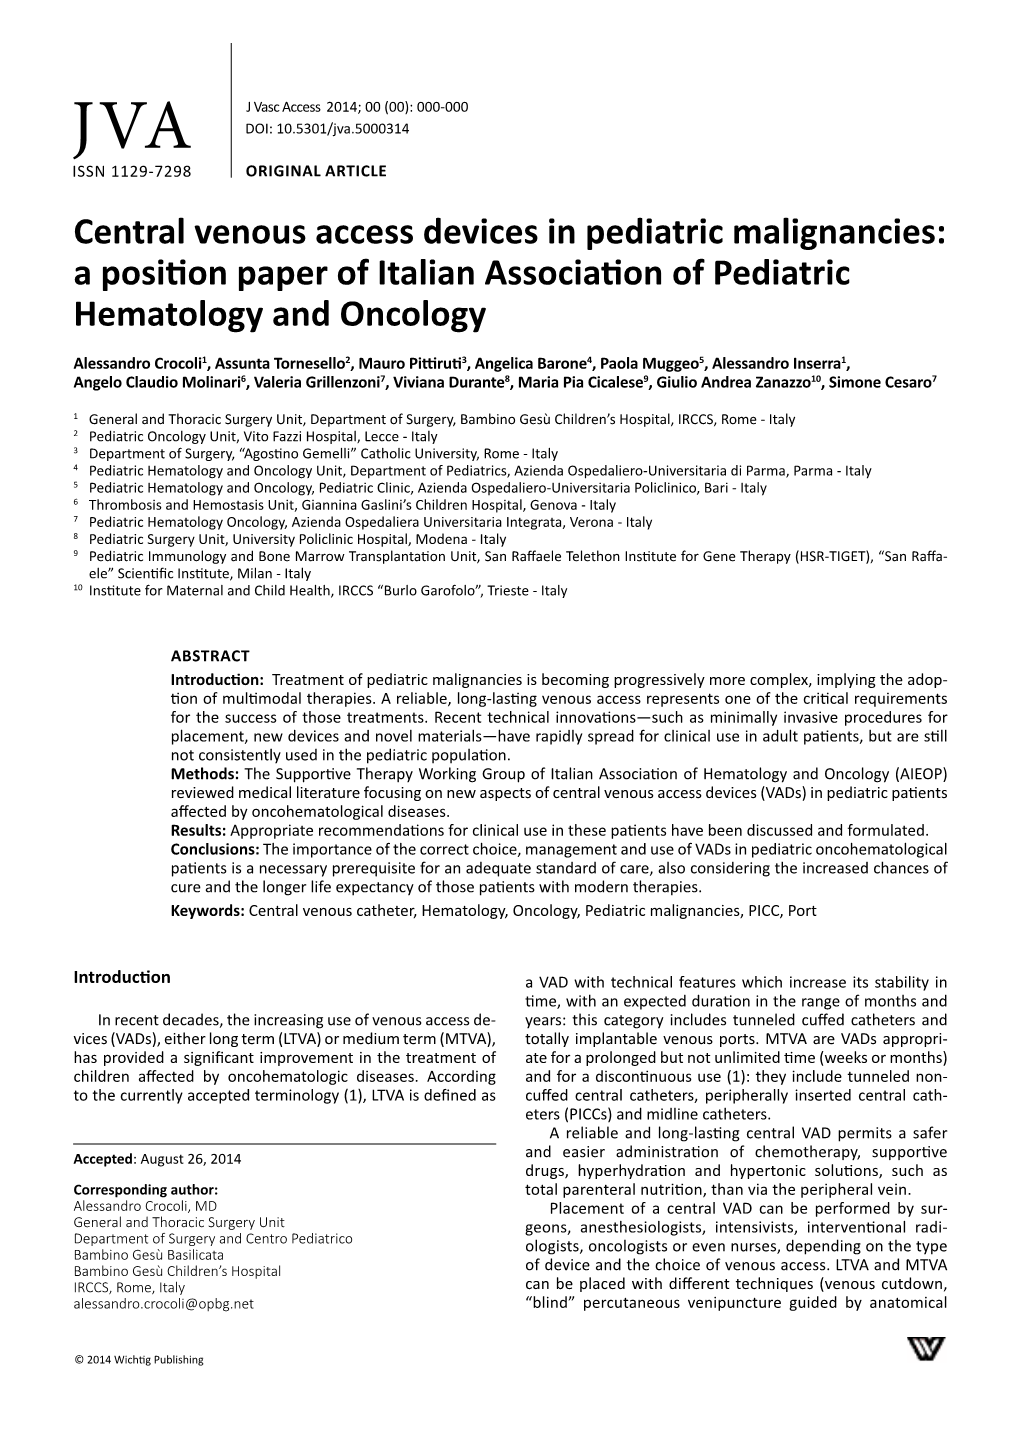 Central Venous Access Devices in Pediatric Malignancies: a Positon Paper of Italian Associaton of Pediatric Hematology and Oncology